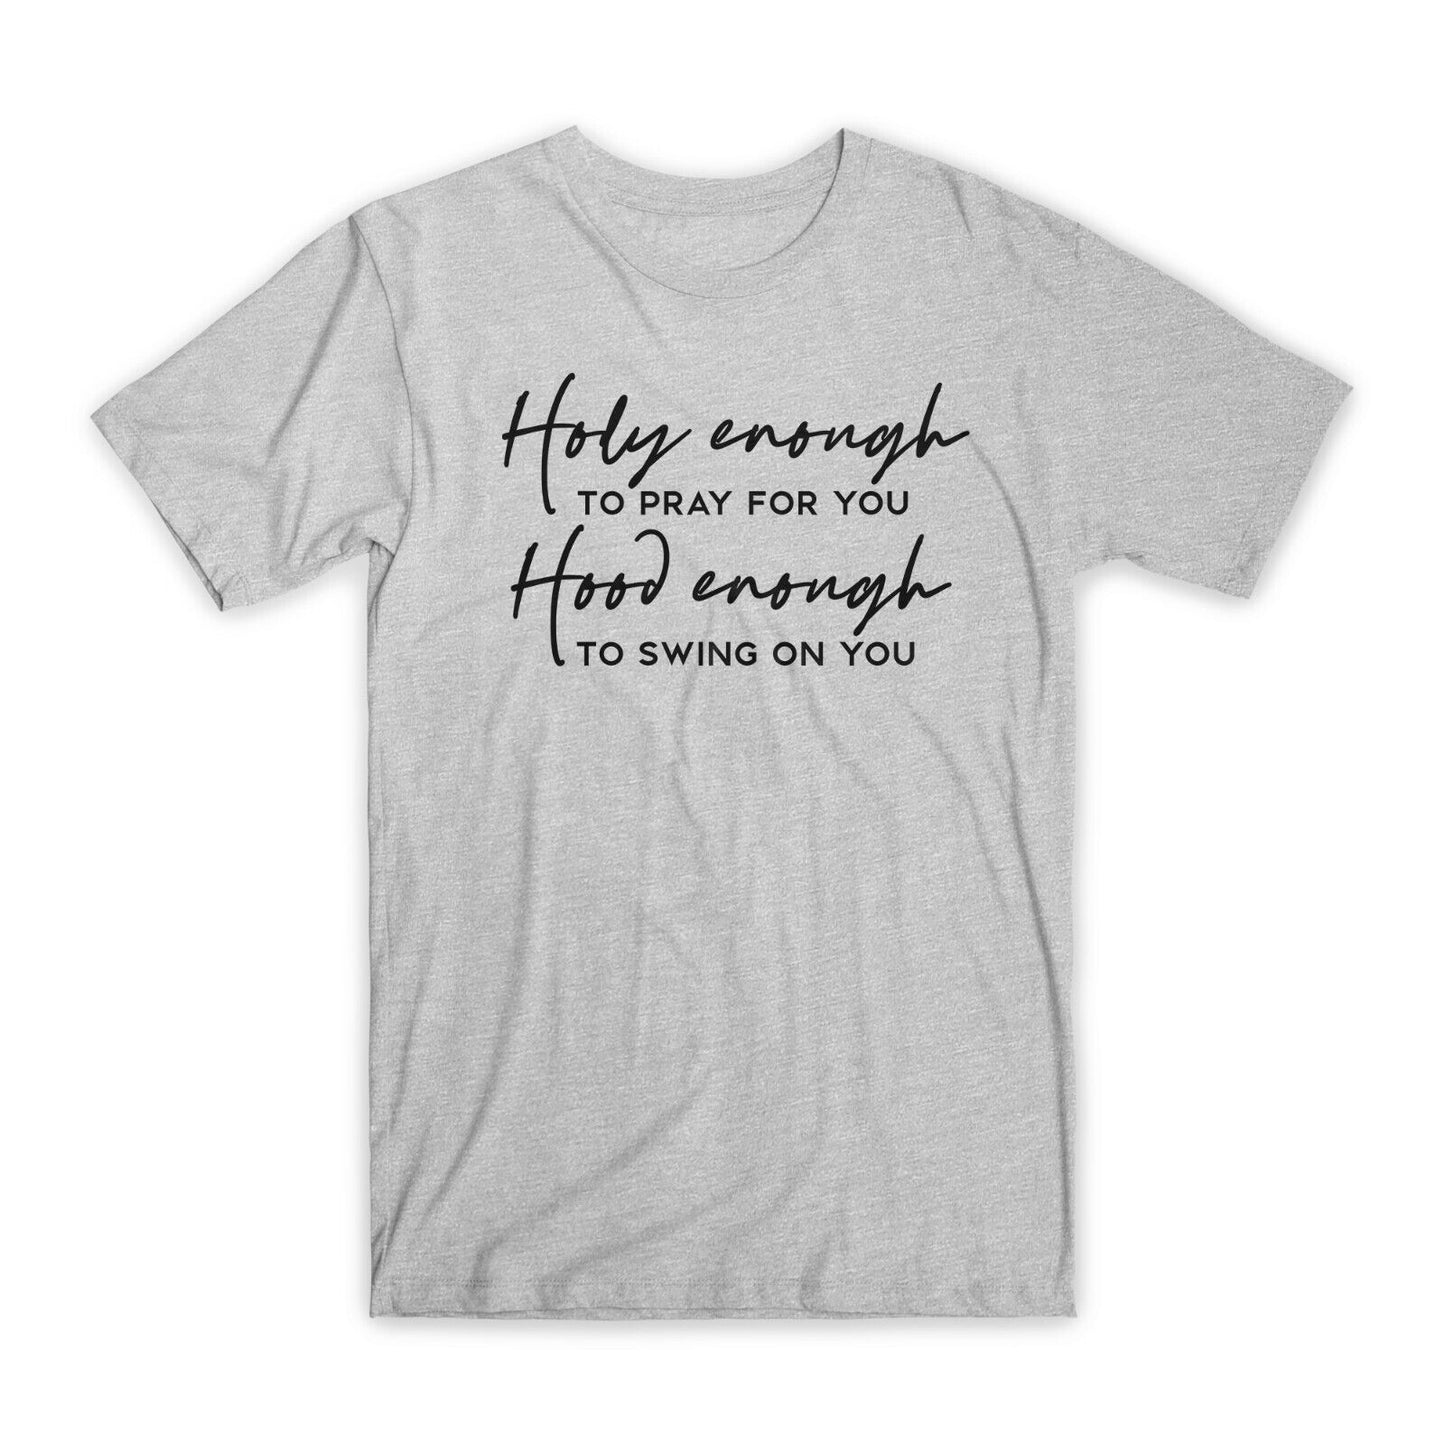 Holy Enough To Pray for You T-Shirt Premium Cotton Crew Neck Funny Tees Gift NEW